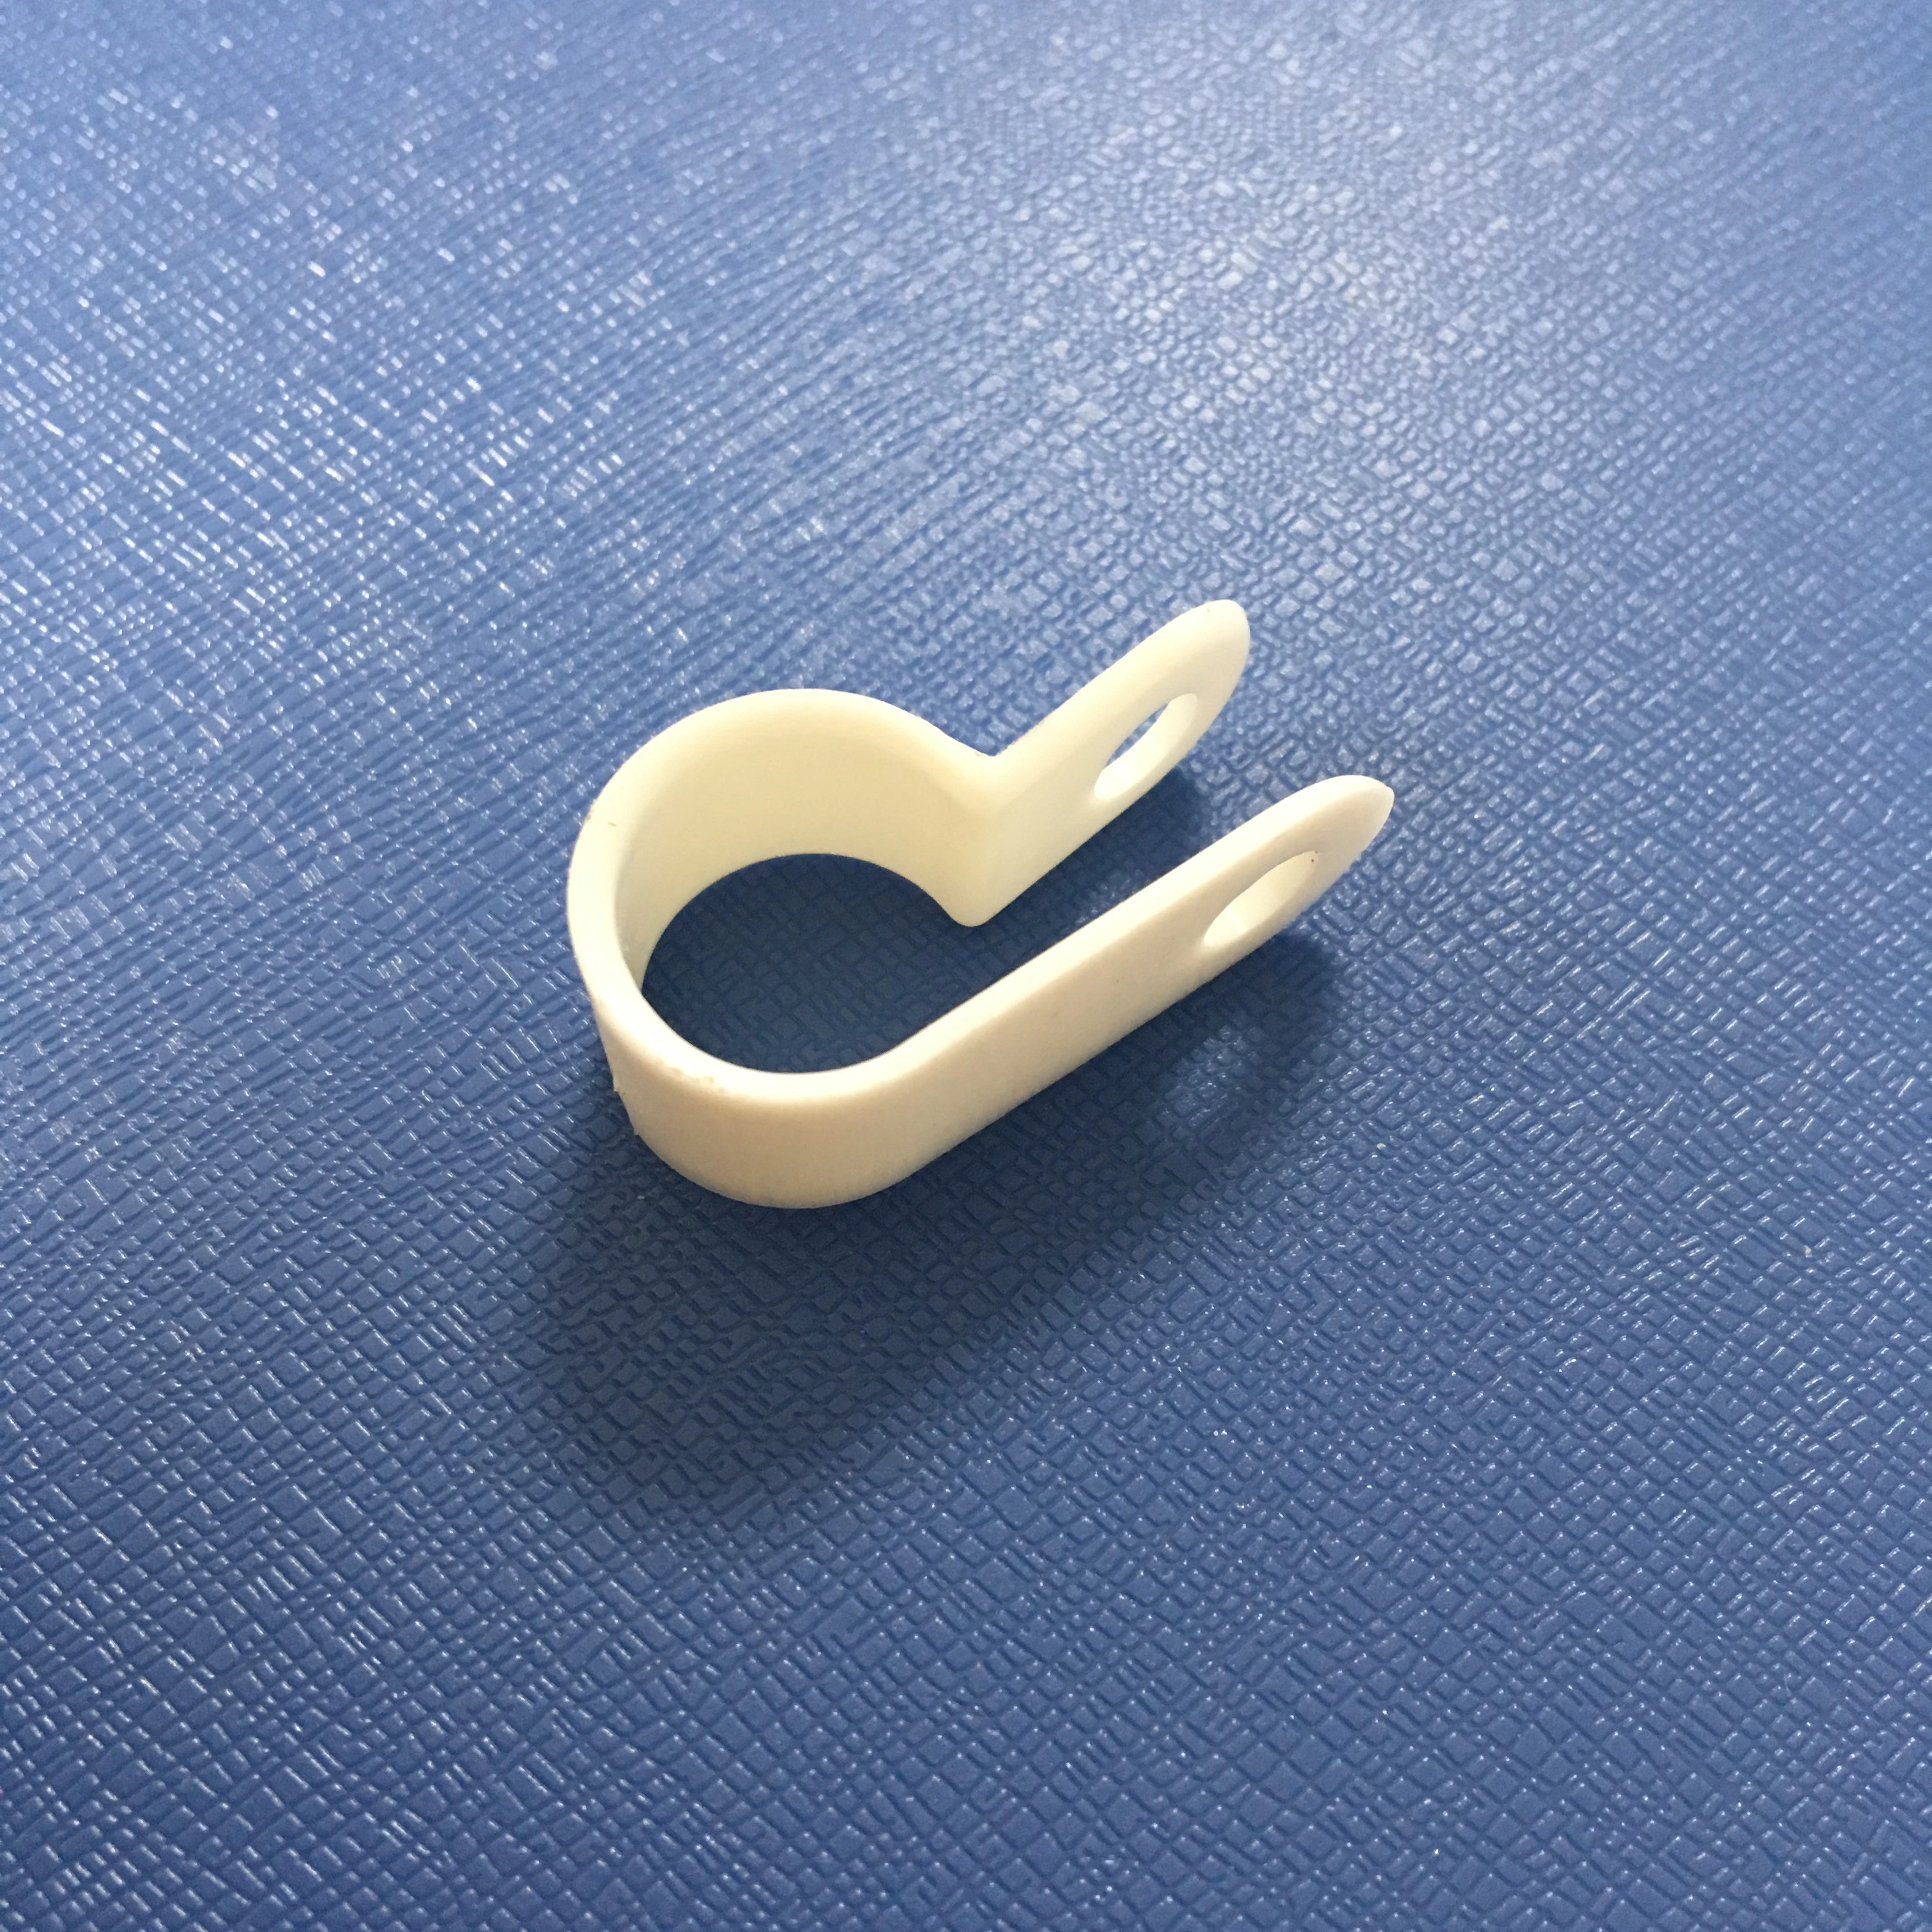 1/2 Inch 12.7mm R type Plastic Cable Clips